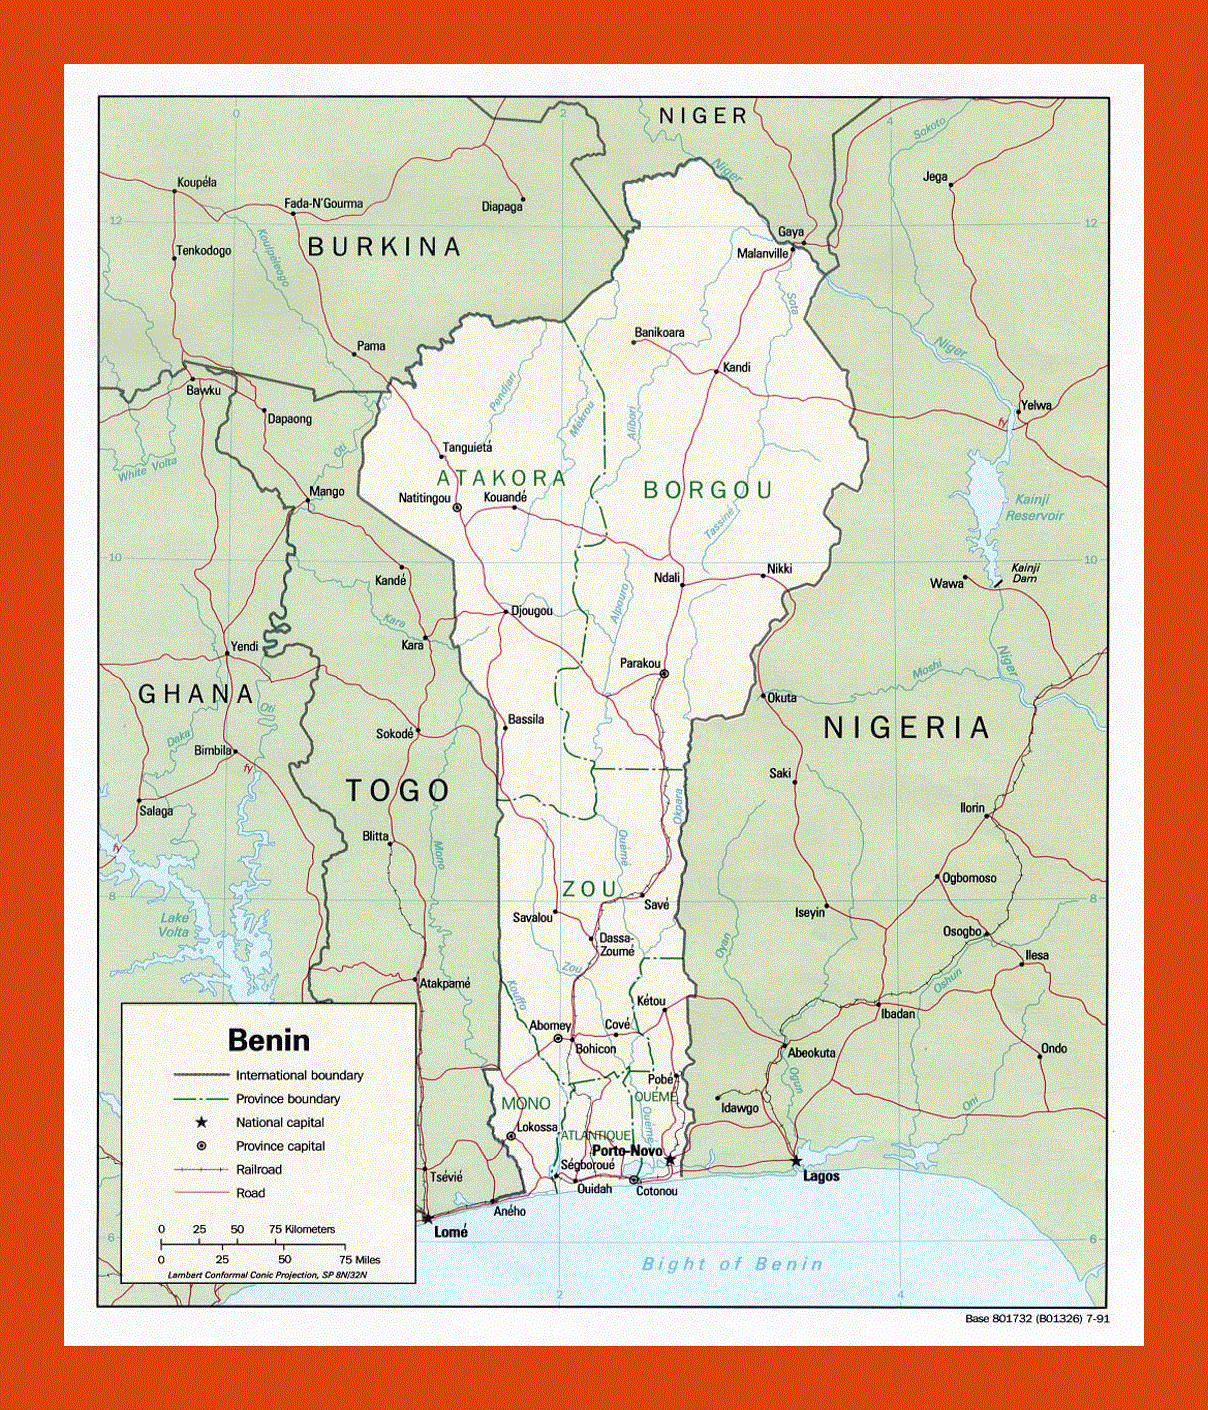 Political and administrative map of Benin - 1991